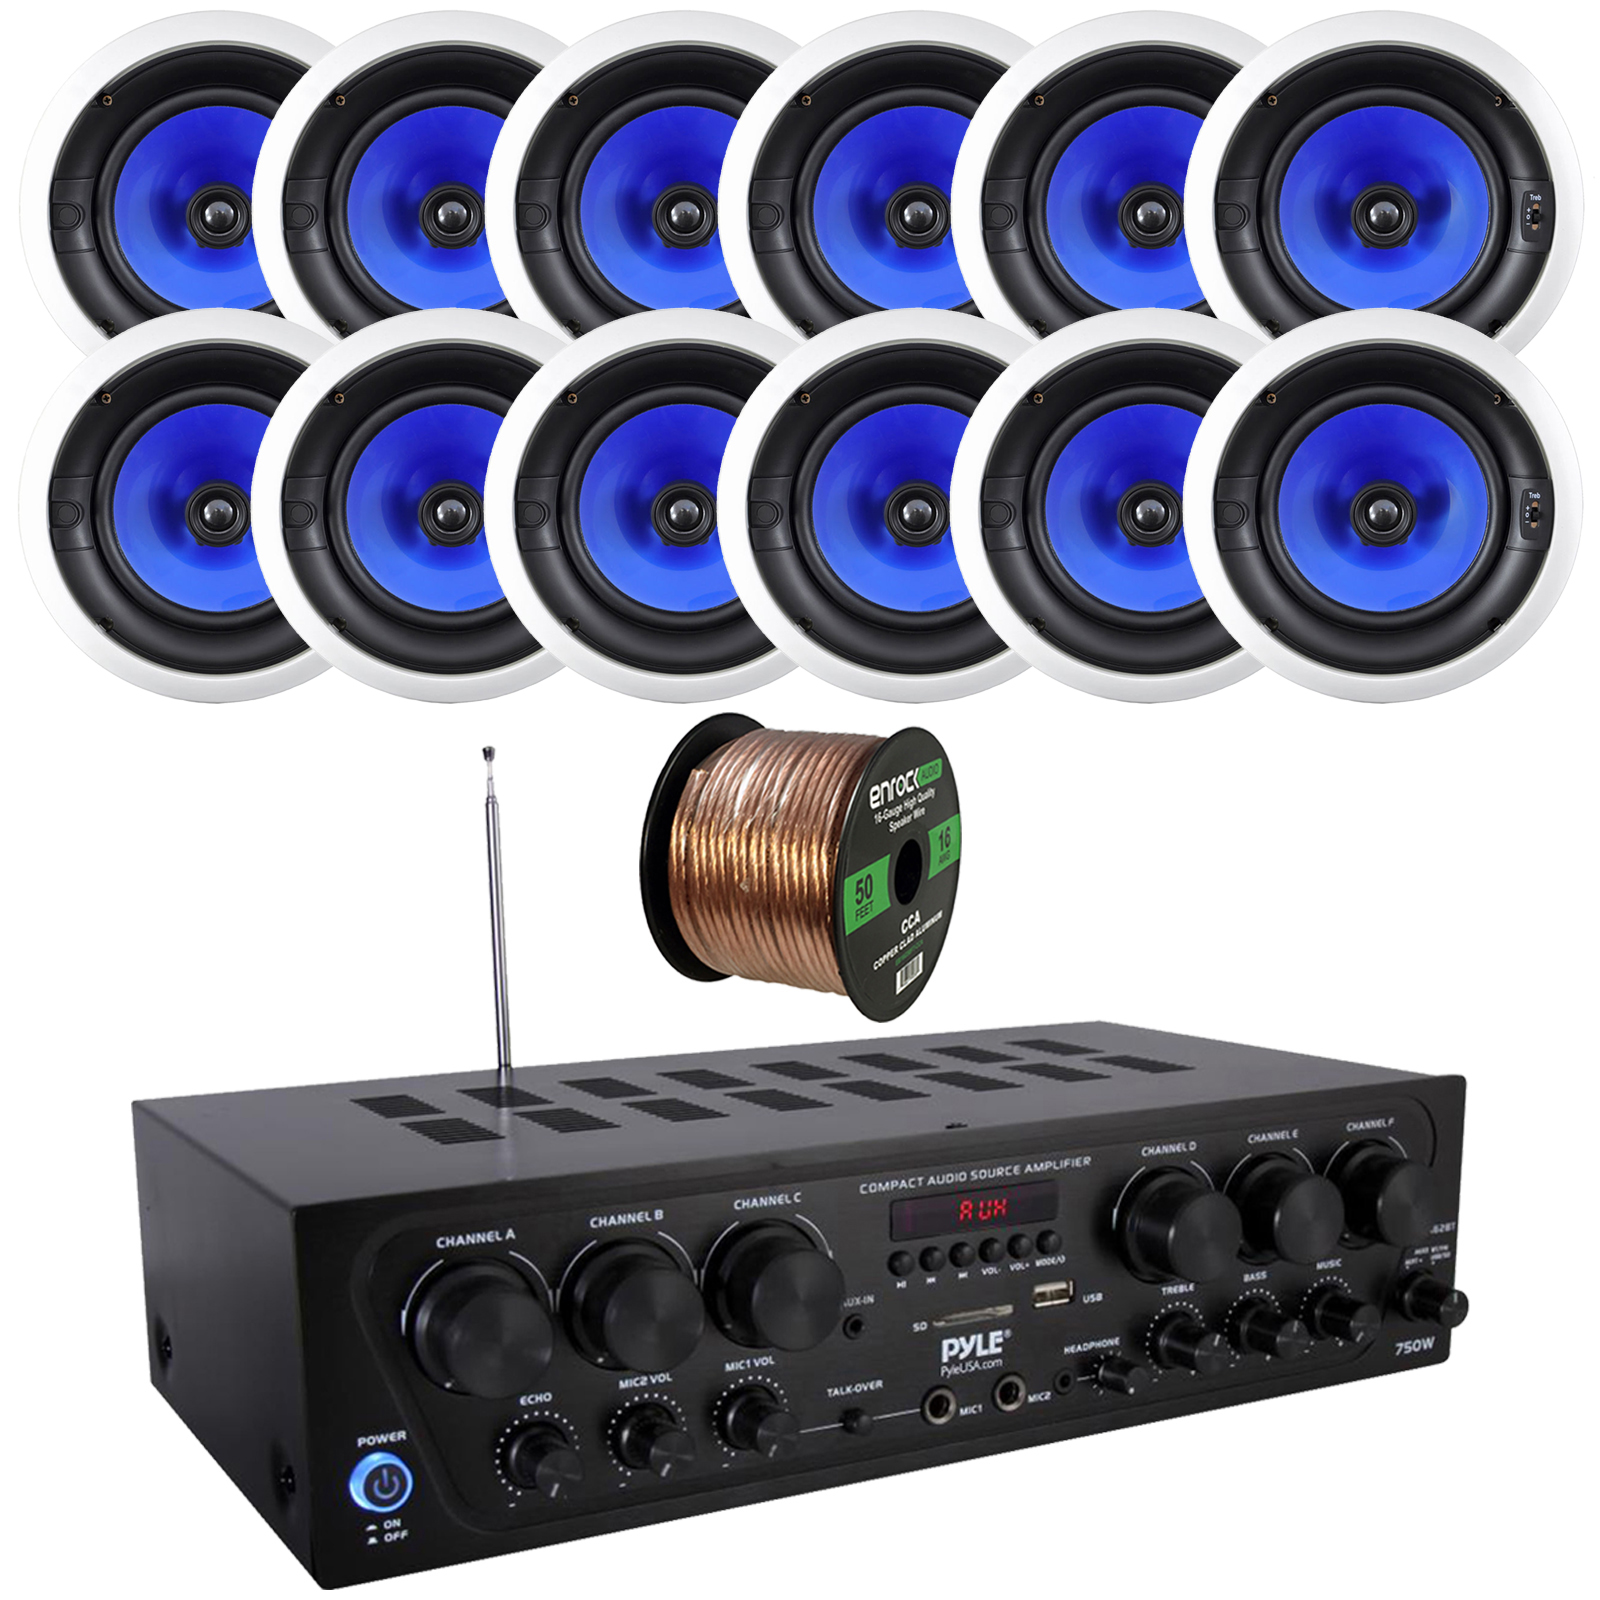 Pyle 6-Channel 750W Bluetooth USB AUX FM Stereo Amplifier Receiver Home Audio System Bundle Combo with 12x 8" 300W 2-Way Full Range In-Ceiling Stereo Speakers, 16 Gauge 50 Feet Speaker Wire - image 1 of 4